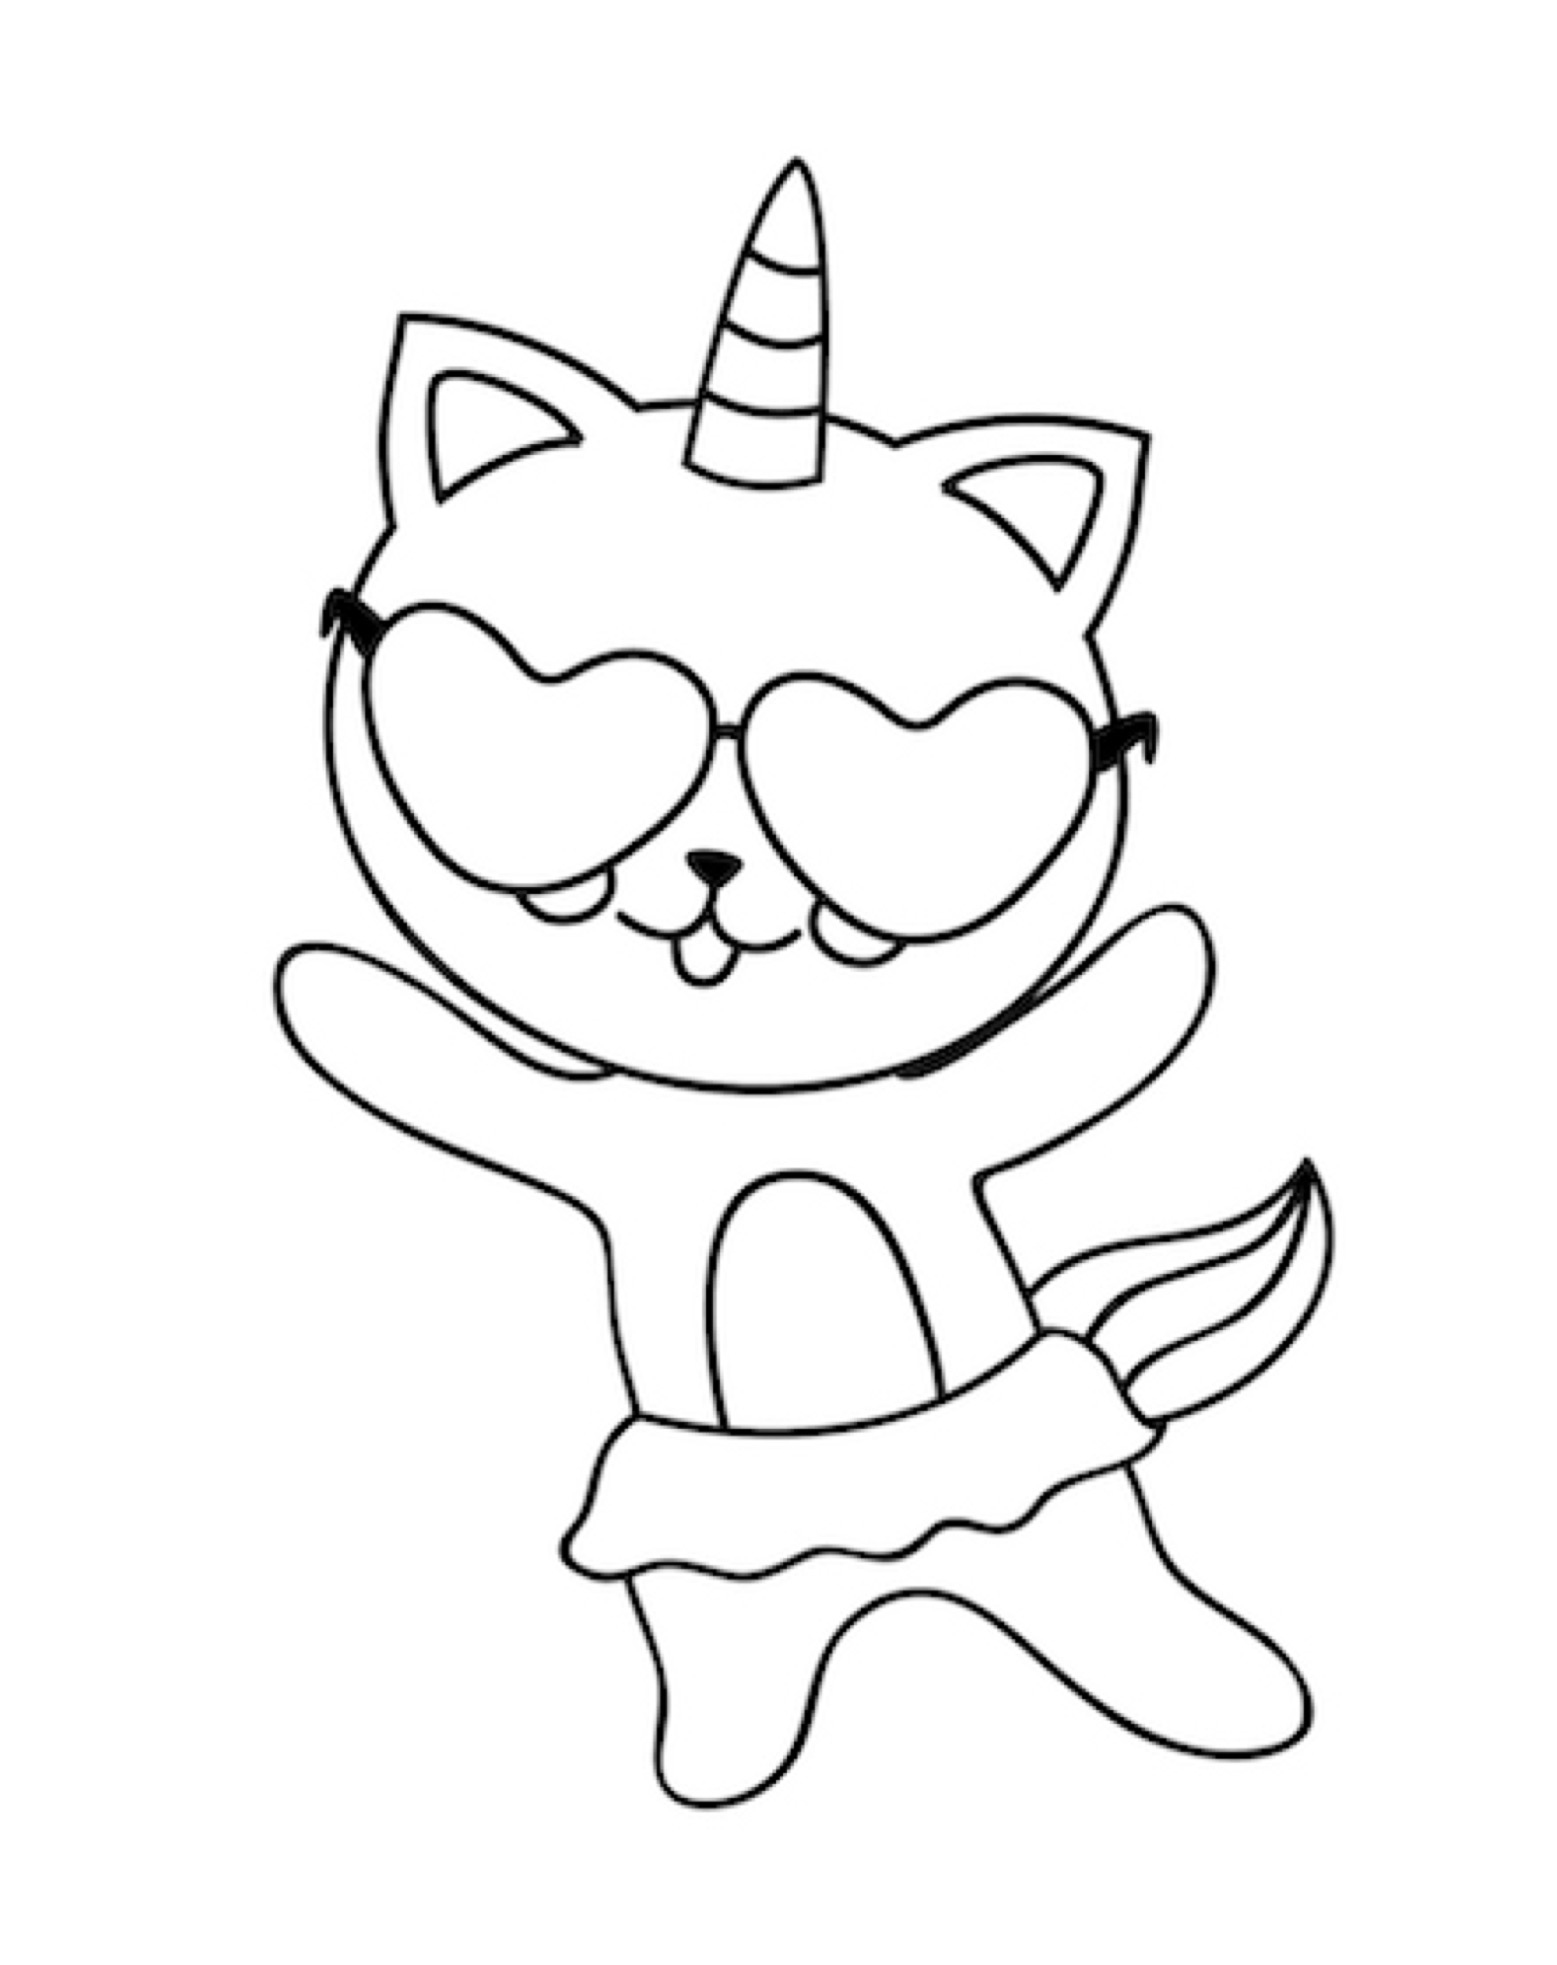 Dancing Unicorn Cat Coloring Pages - Cat Coloring Pages - Coloring